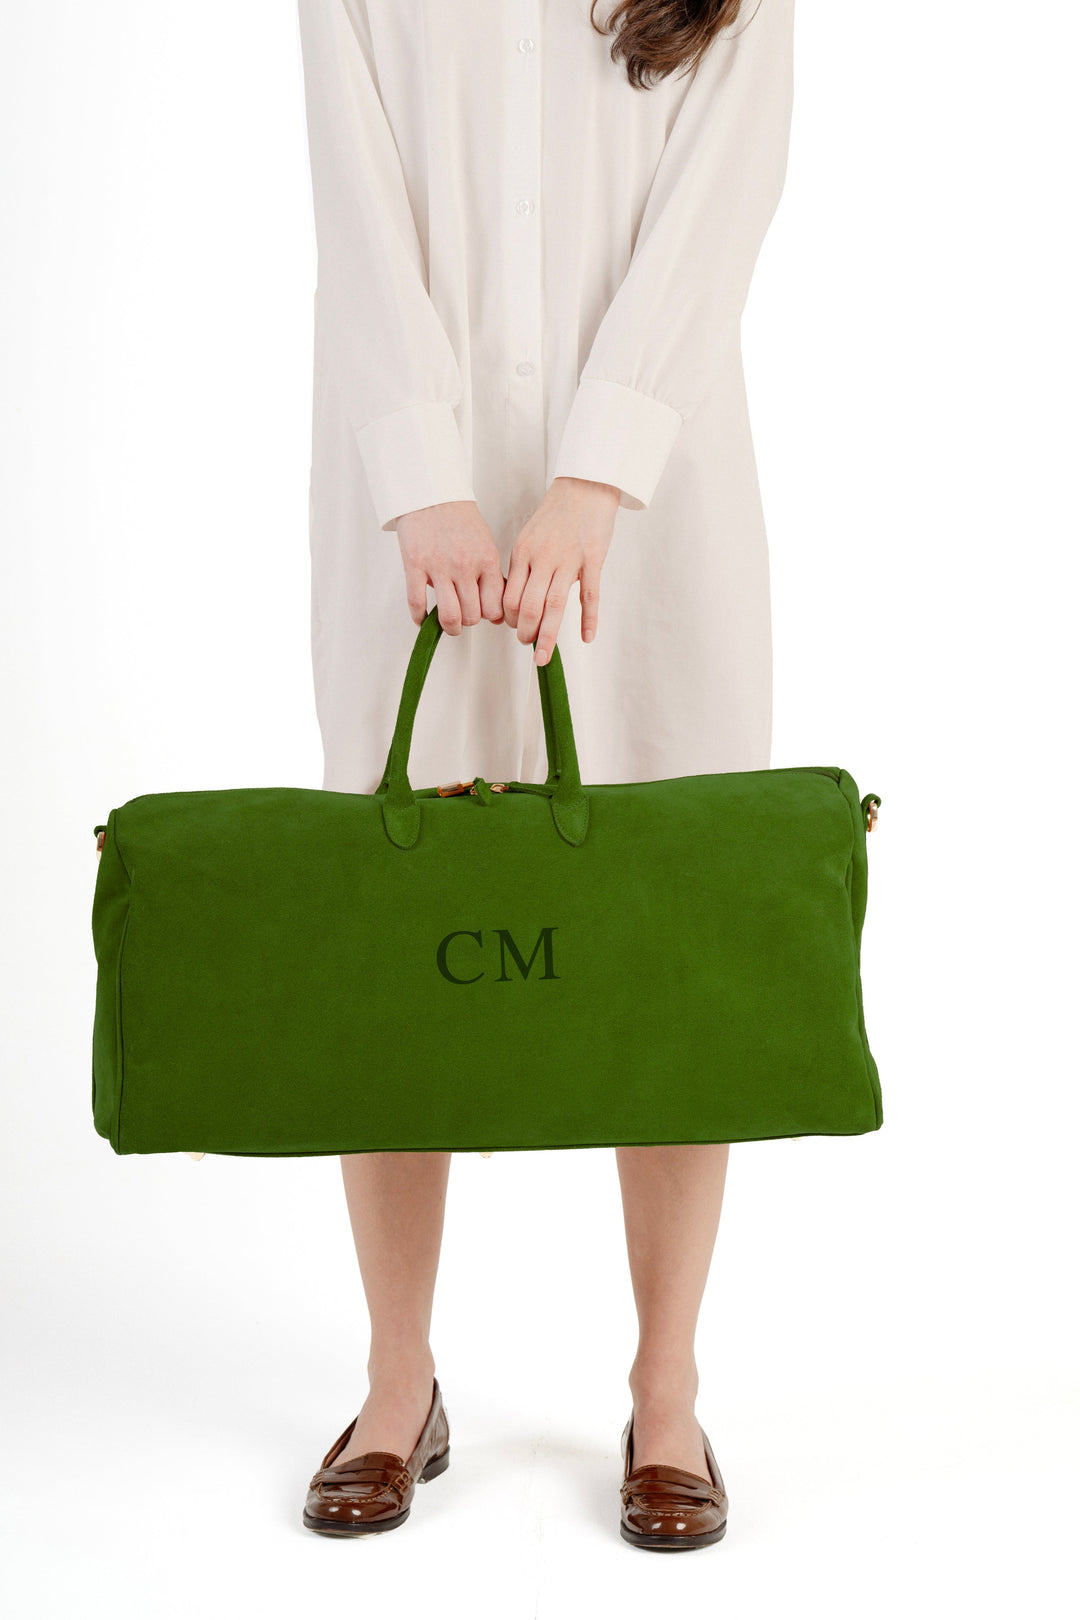 Person holding green monogrammed travel bag in front of white background